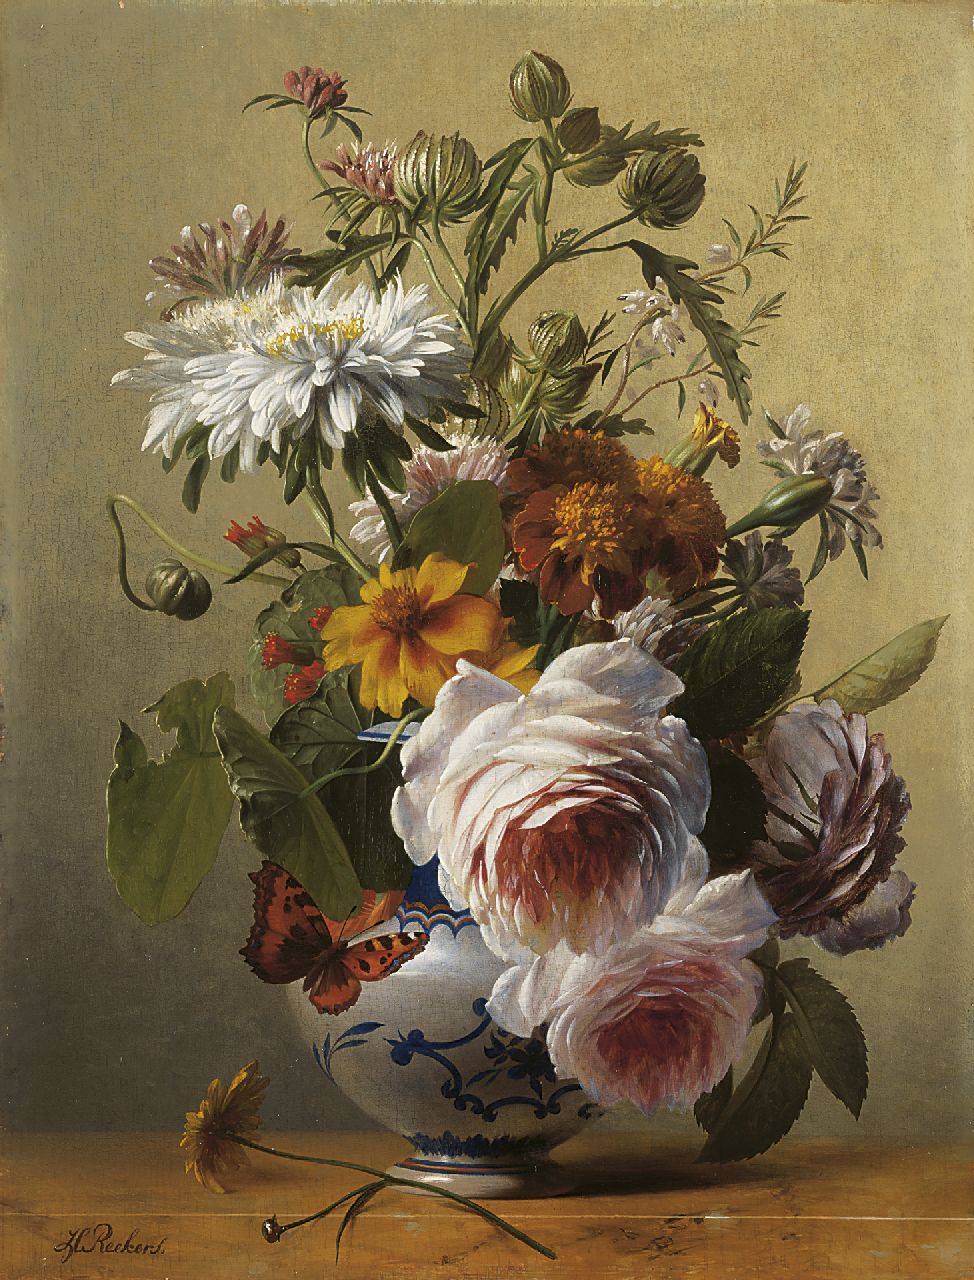 Reekers sr. H.  | Hendrik Reekers sr., Flower still life with roses, marigolds and chrysanthemums, Öl auf Holz 31,9 x 24,4 cm, signed l.l.